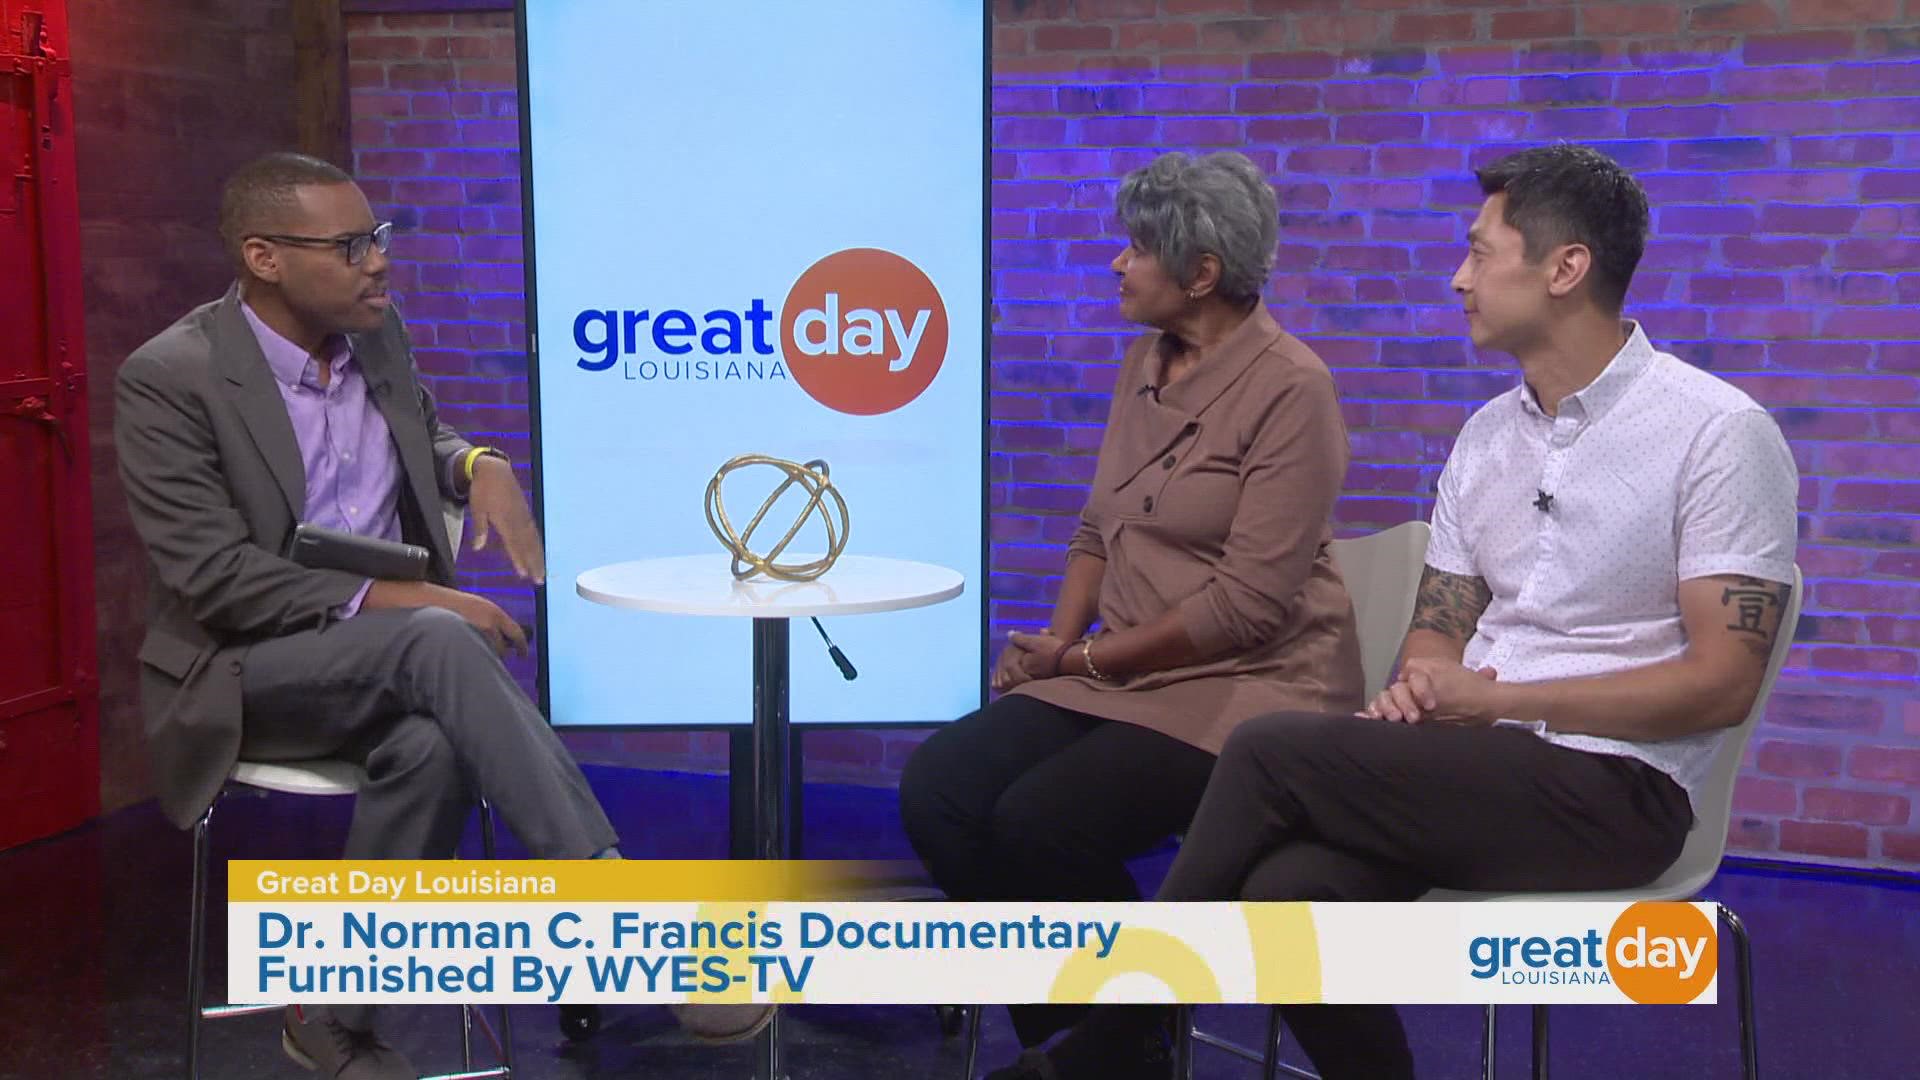 Former WWL-TV anchors, Sally-Ann Roberts and Thanh Truong shared details about an upcoming documentary on WYES-TV.